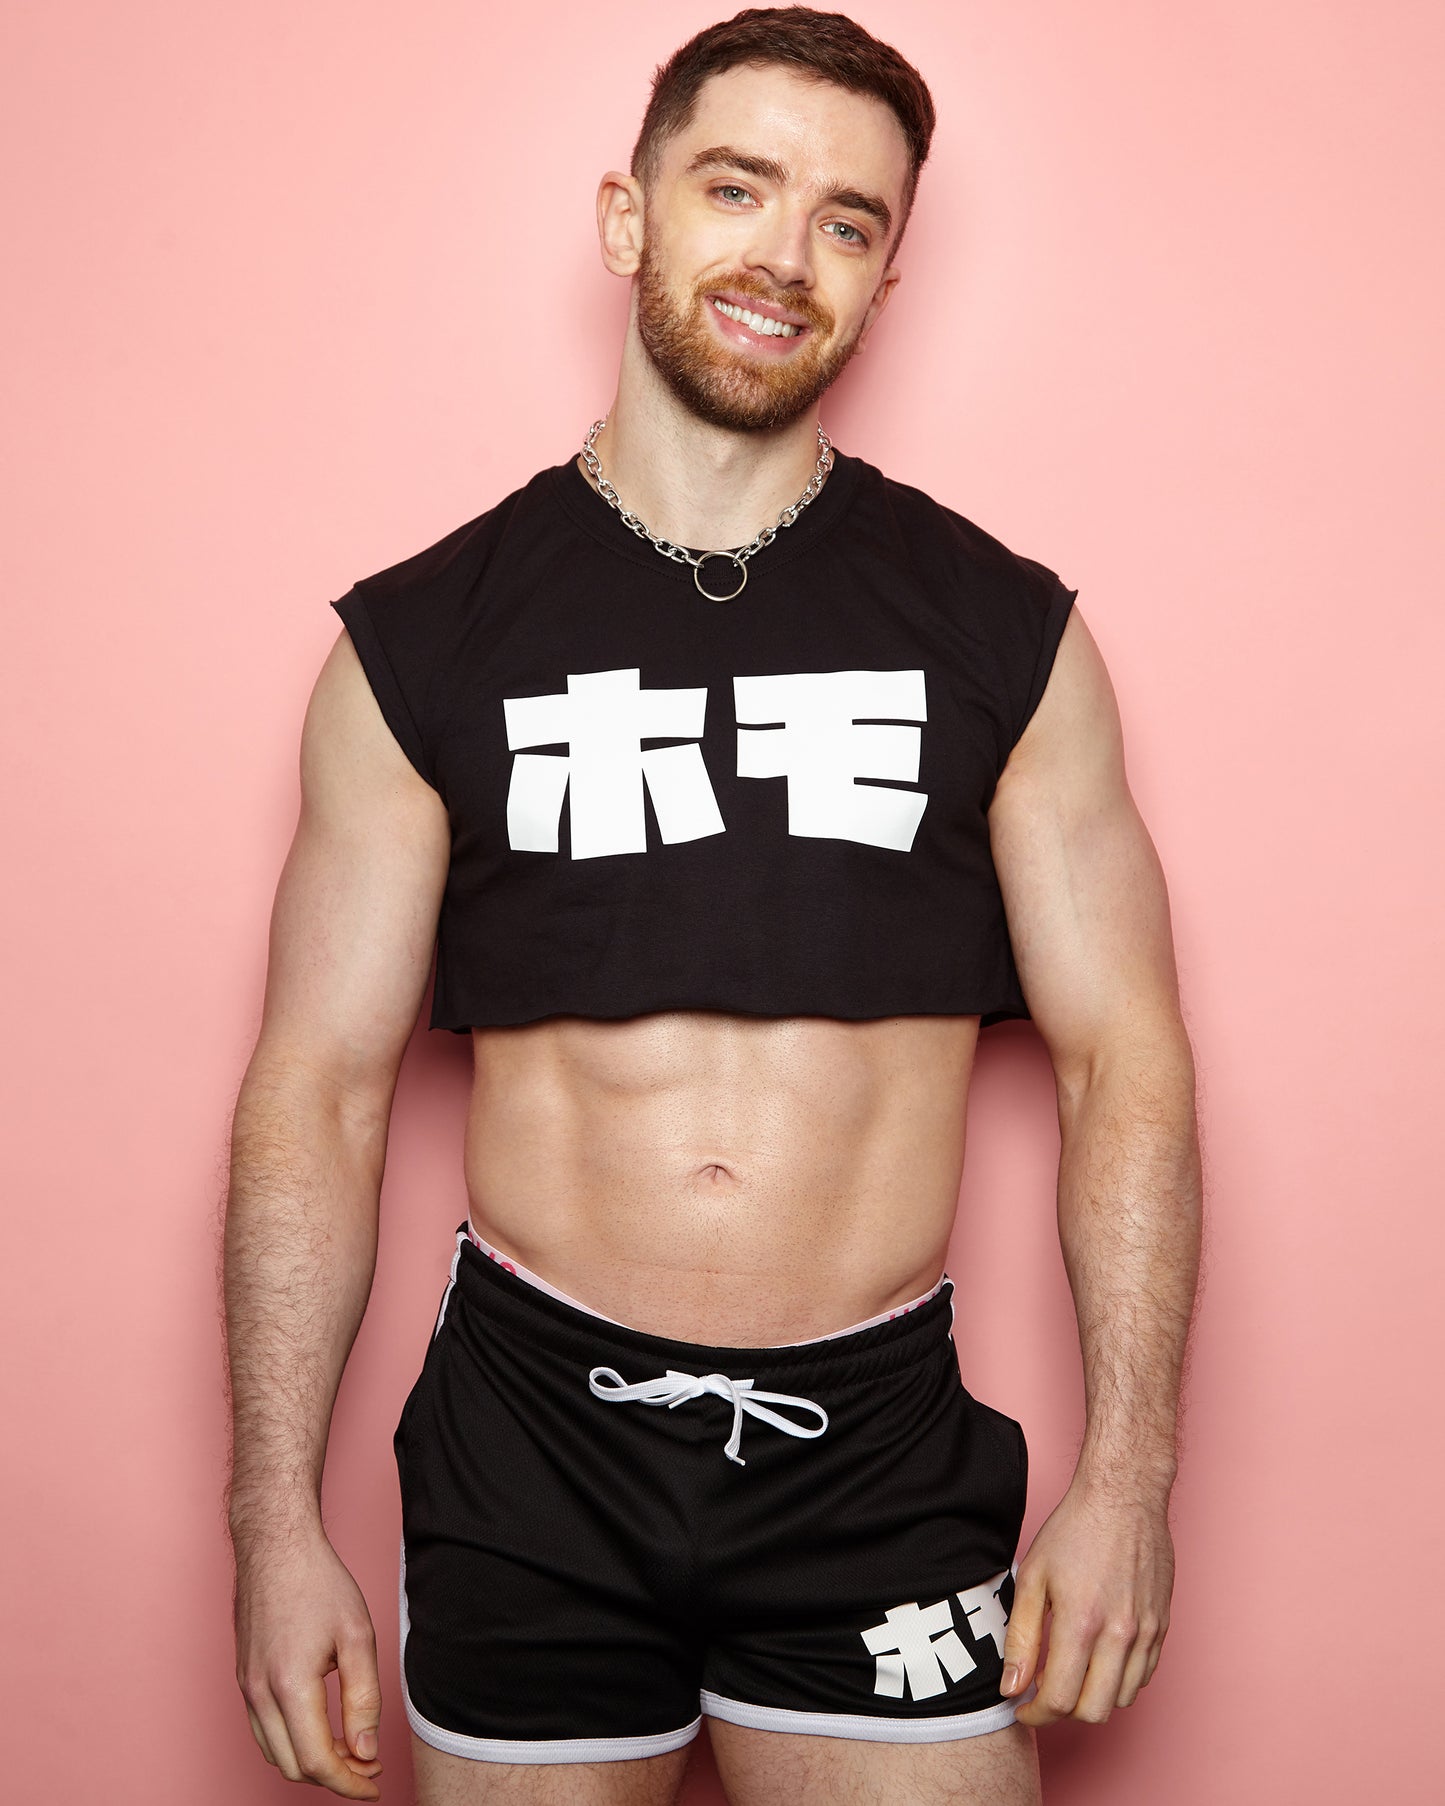 Double Pack - HOMO in Japanese, Sleeveless Crop and Short Shorts - Full outfit.